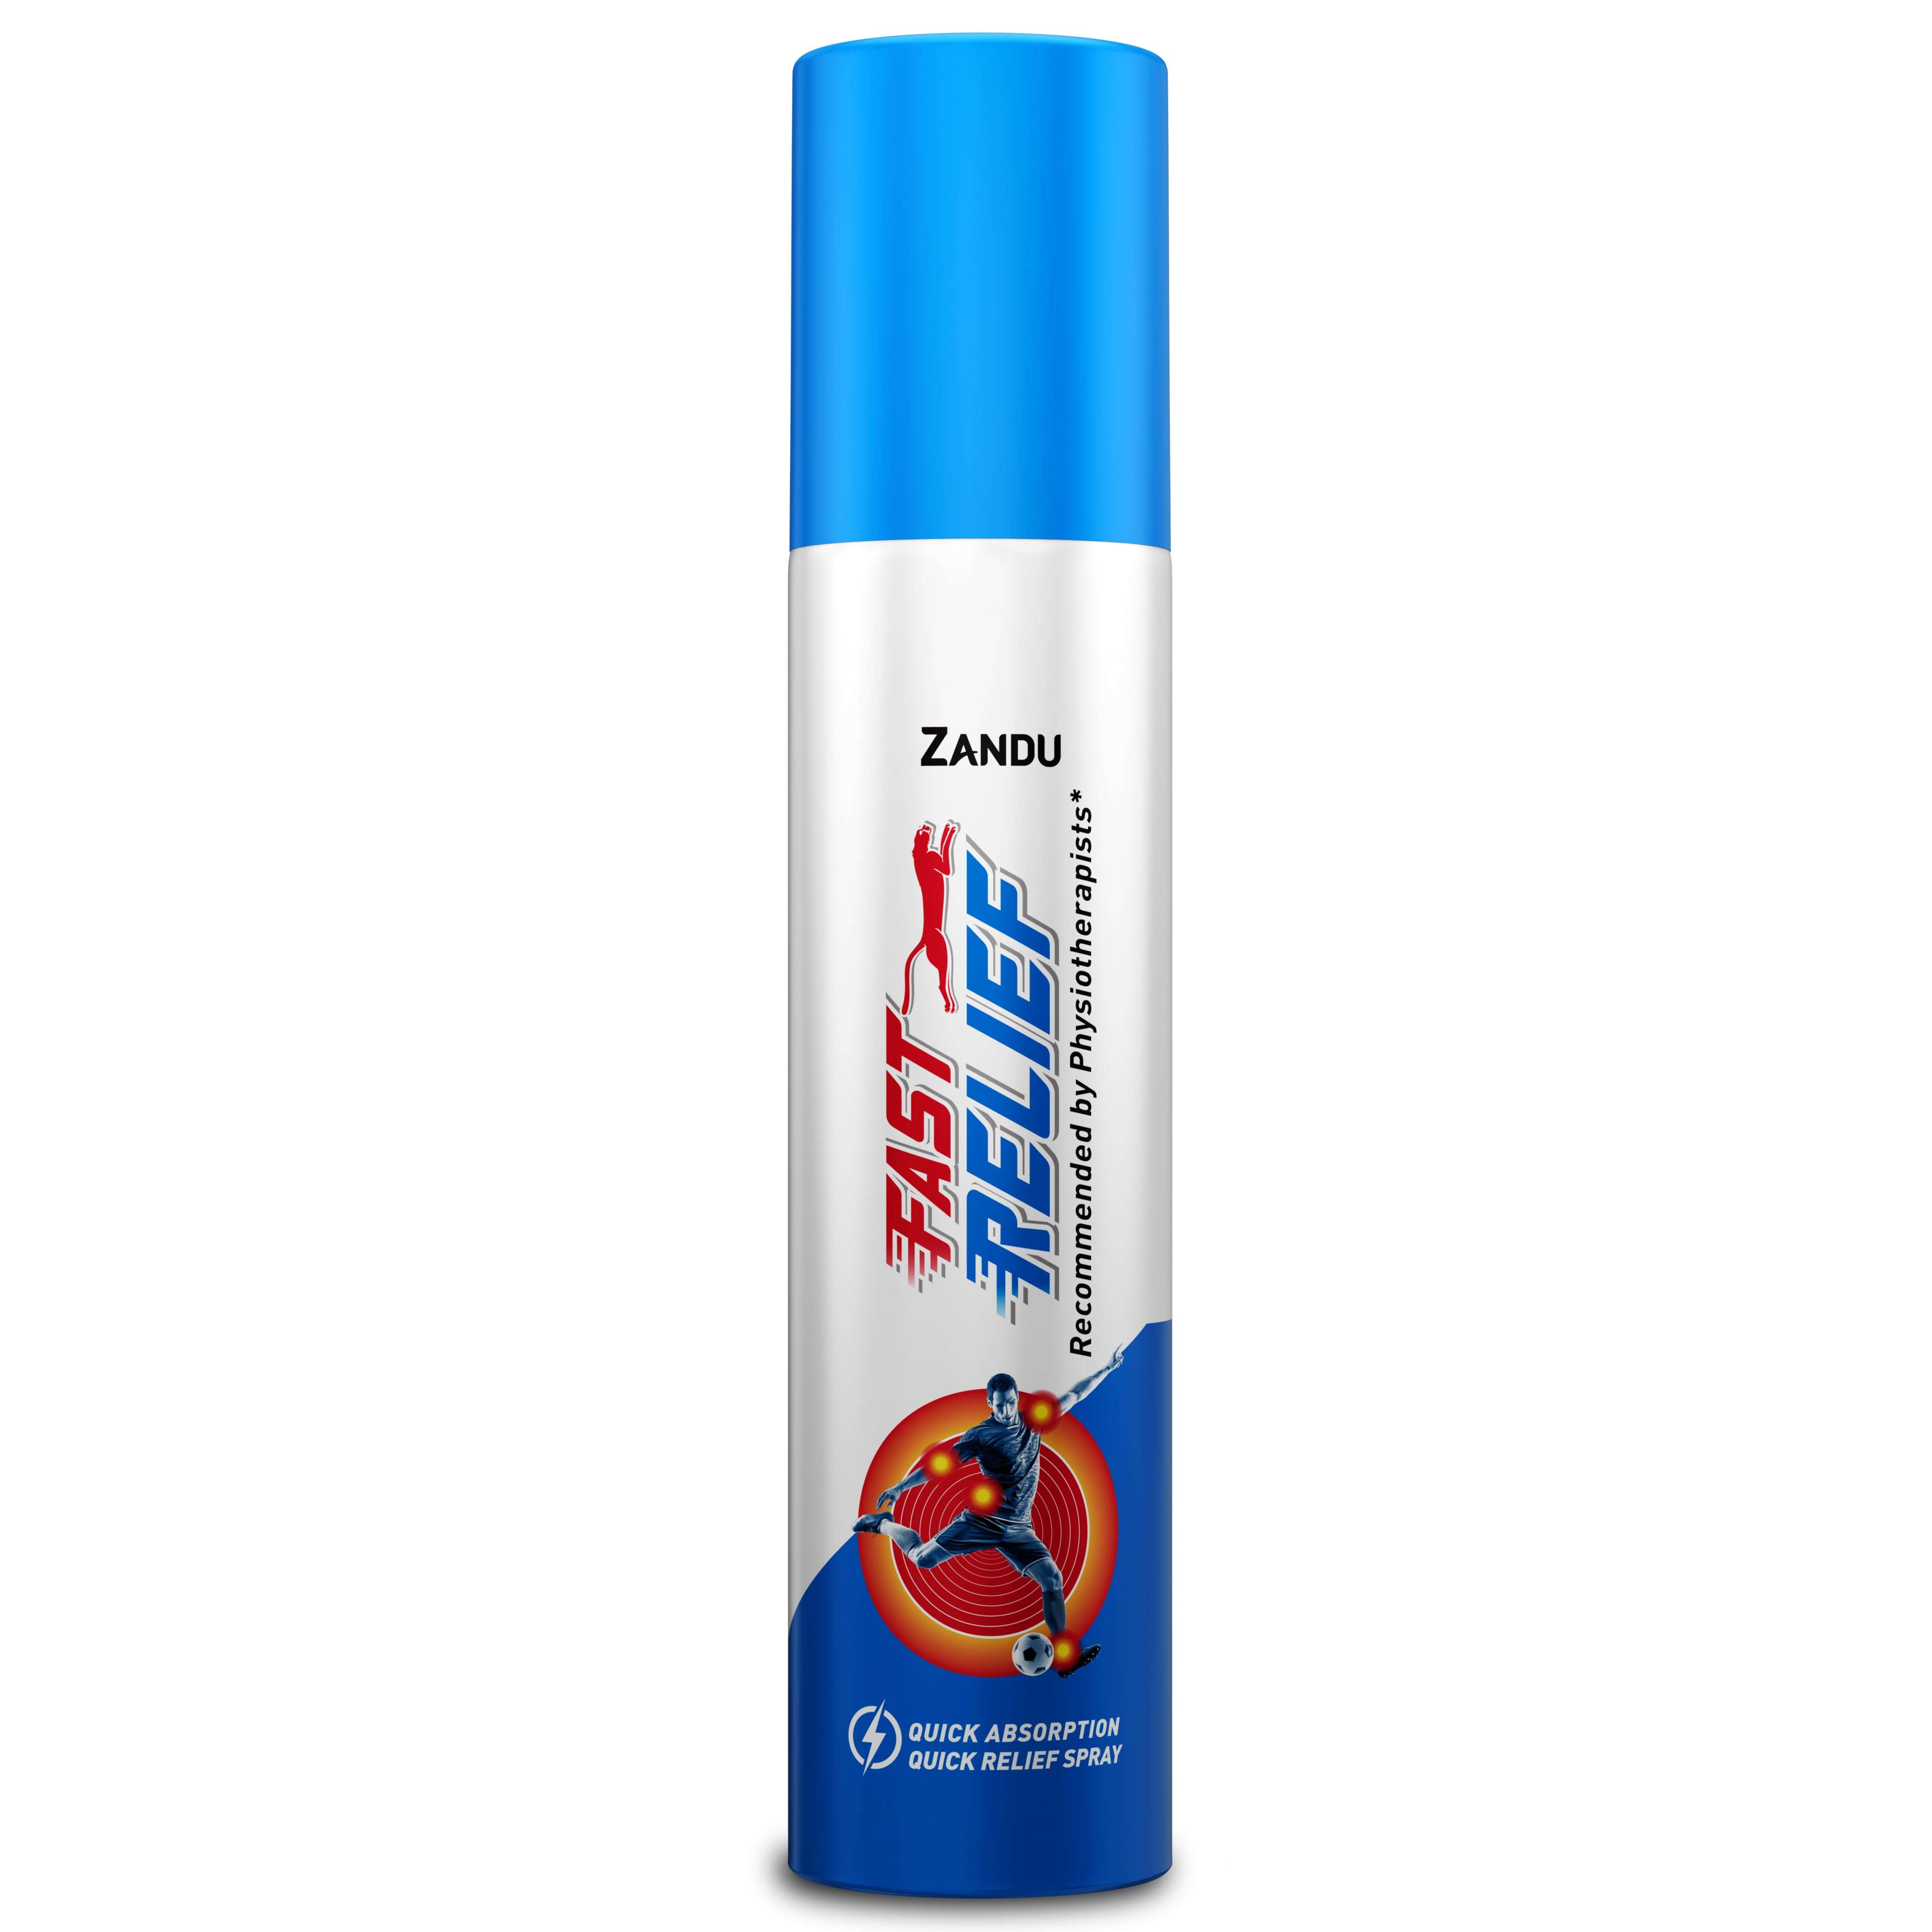 Zandu Fast Relief Pain Spray for Quick Muscle, Join & Back Pain Relief